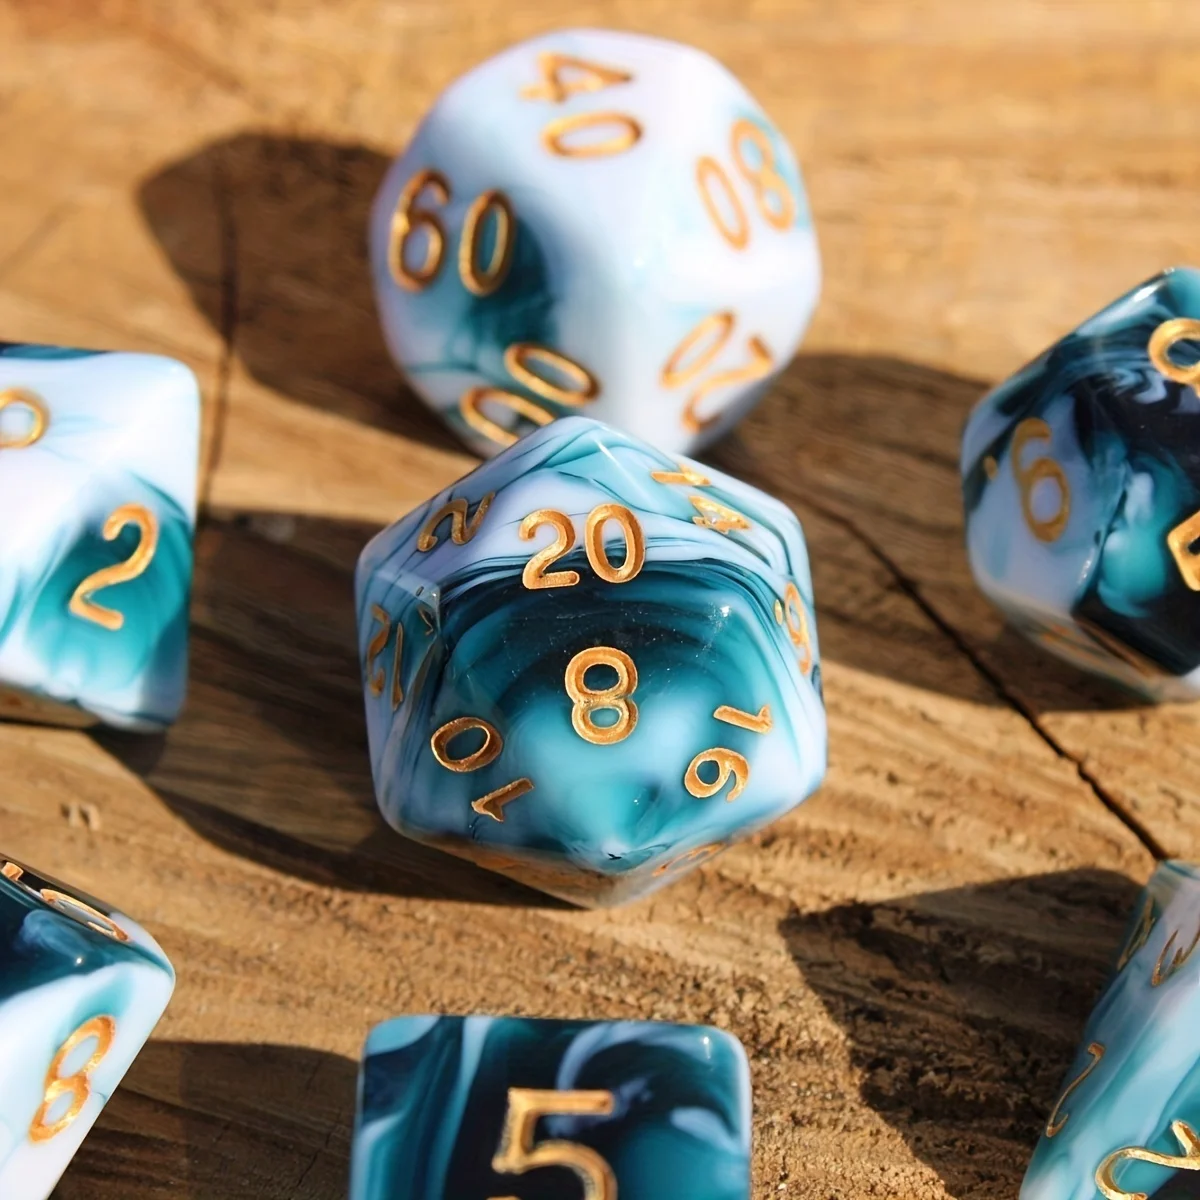 7Pcs/Set Blueberry Marble Dice for DND Dungeons and Dragons Table Games D&D RPG Tabletop Roleplaying minecraft dungeons неофициальное руководство по подземному миру филлипс т